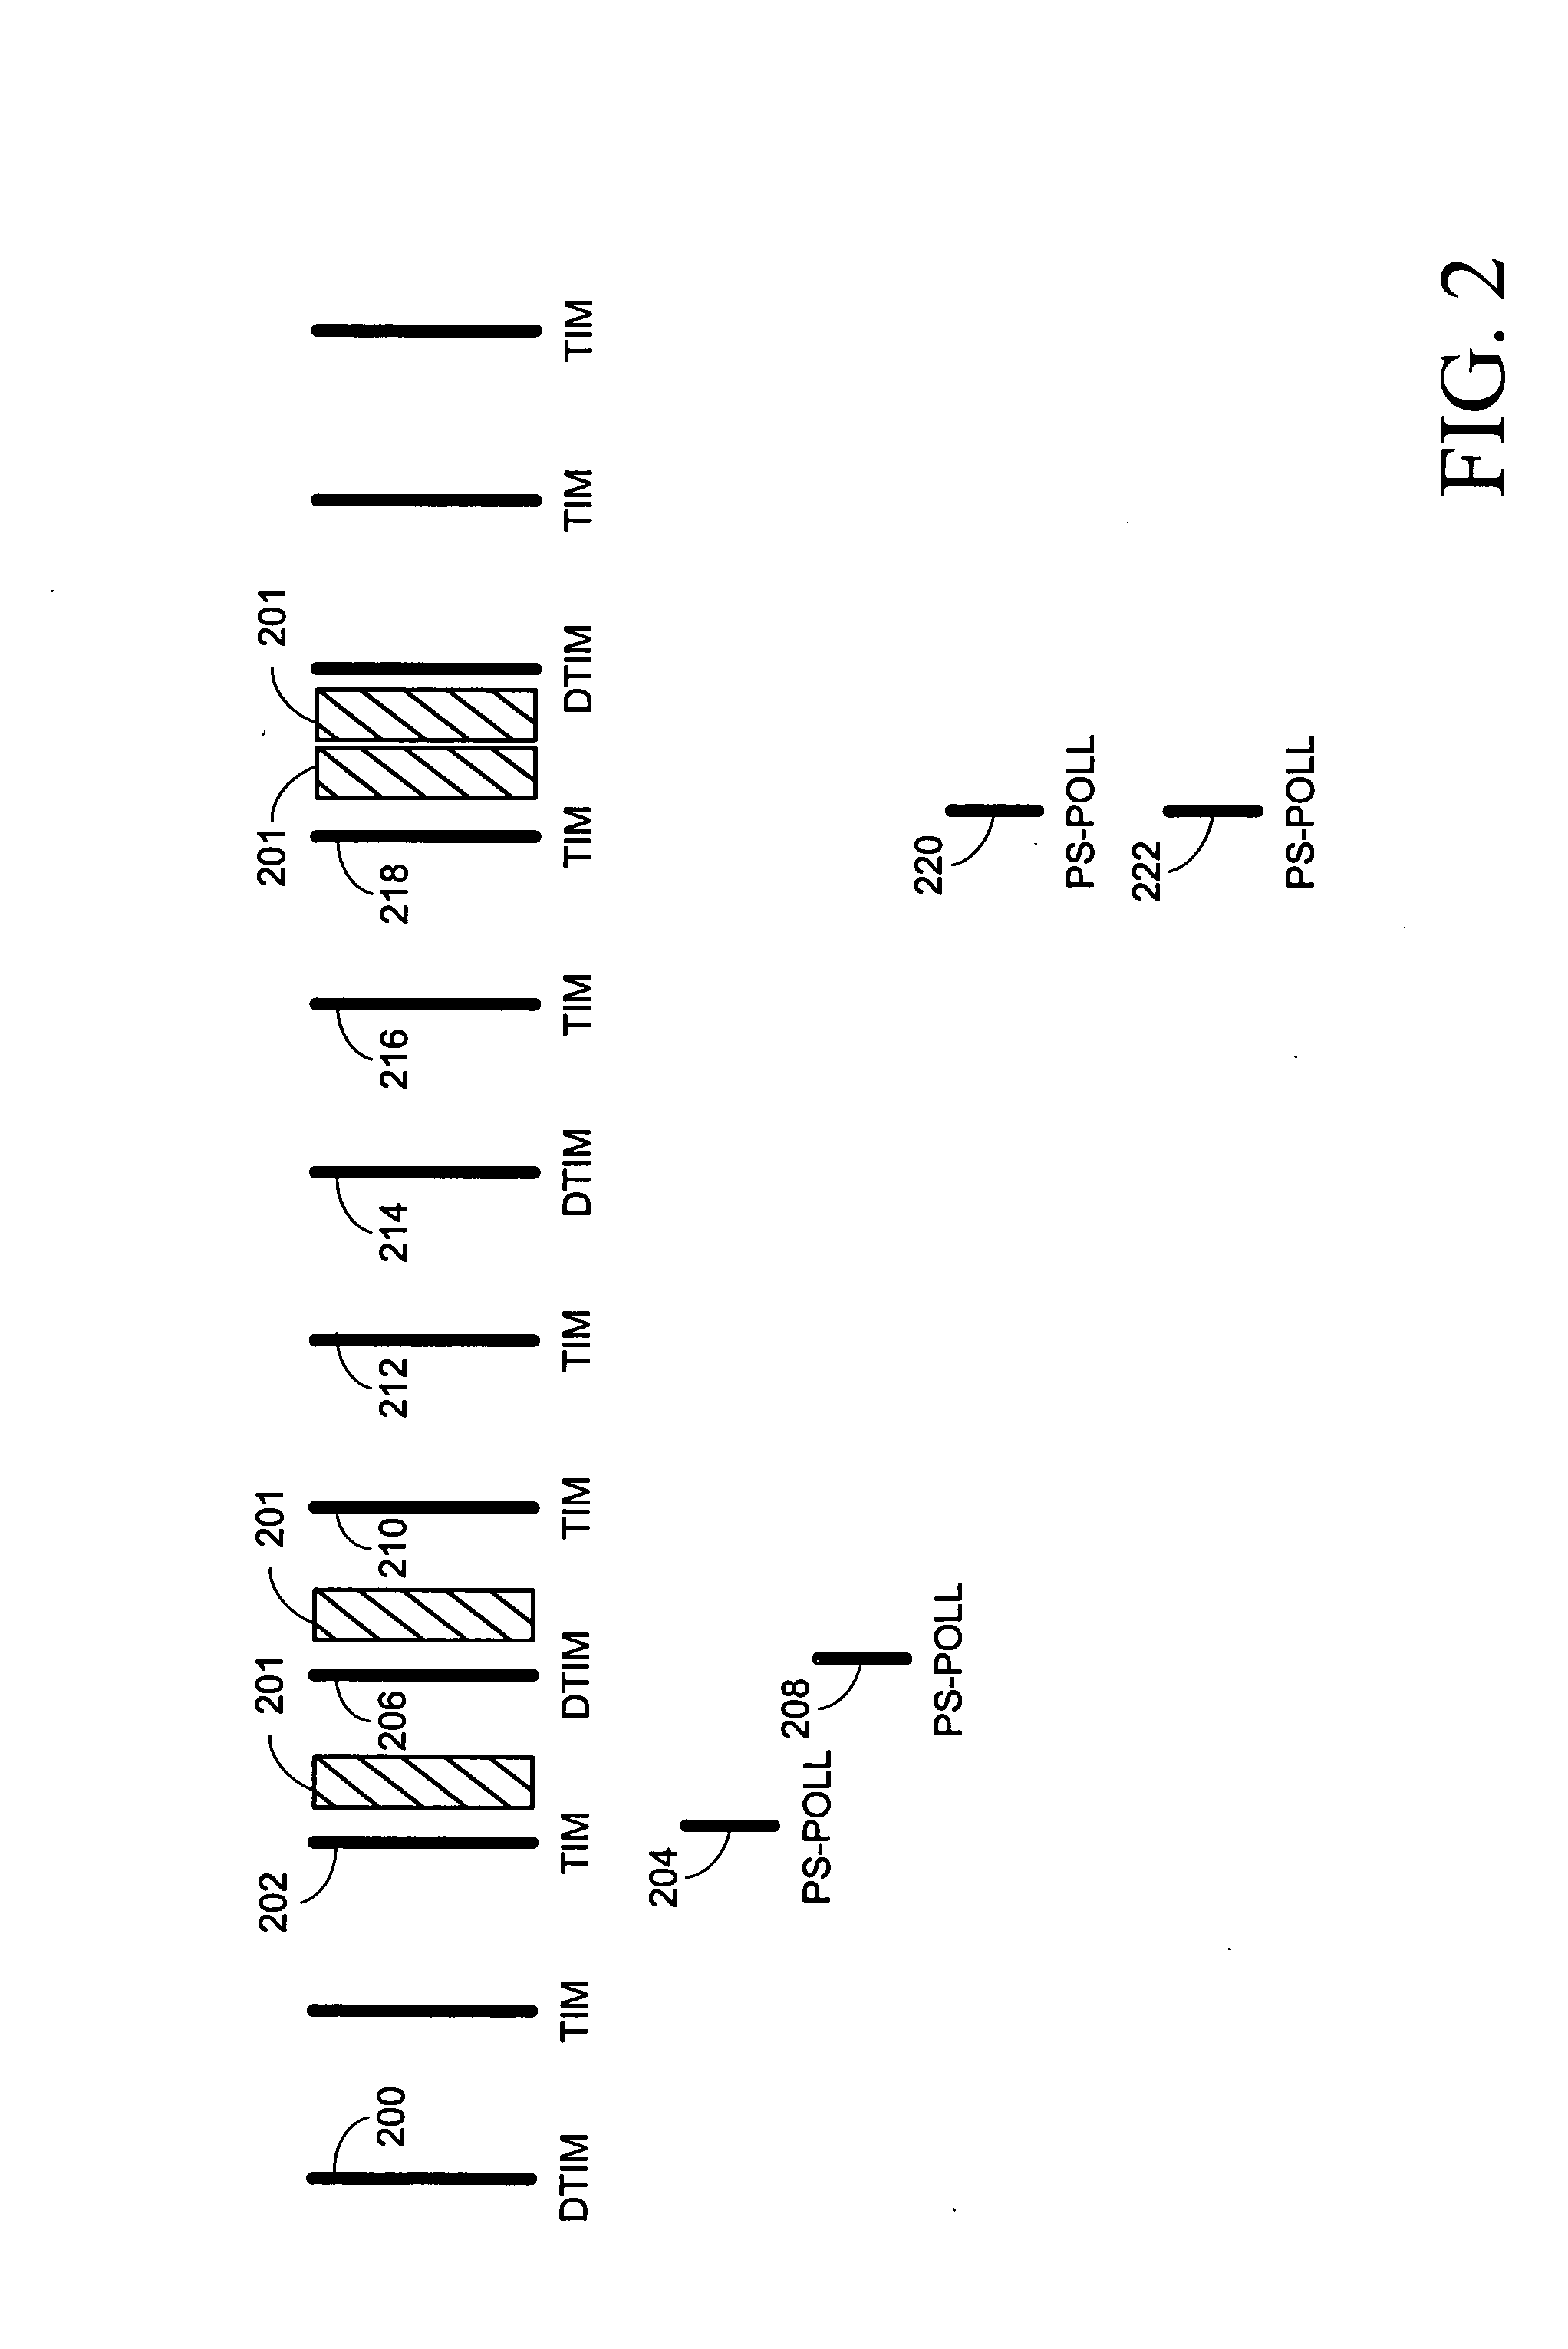 Apparatus and methods for delivery handling broadcast and multicast traffic as unicast traffic in a wireless network